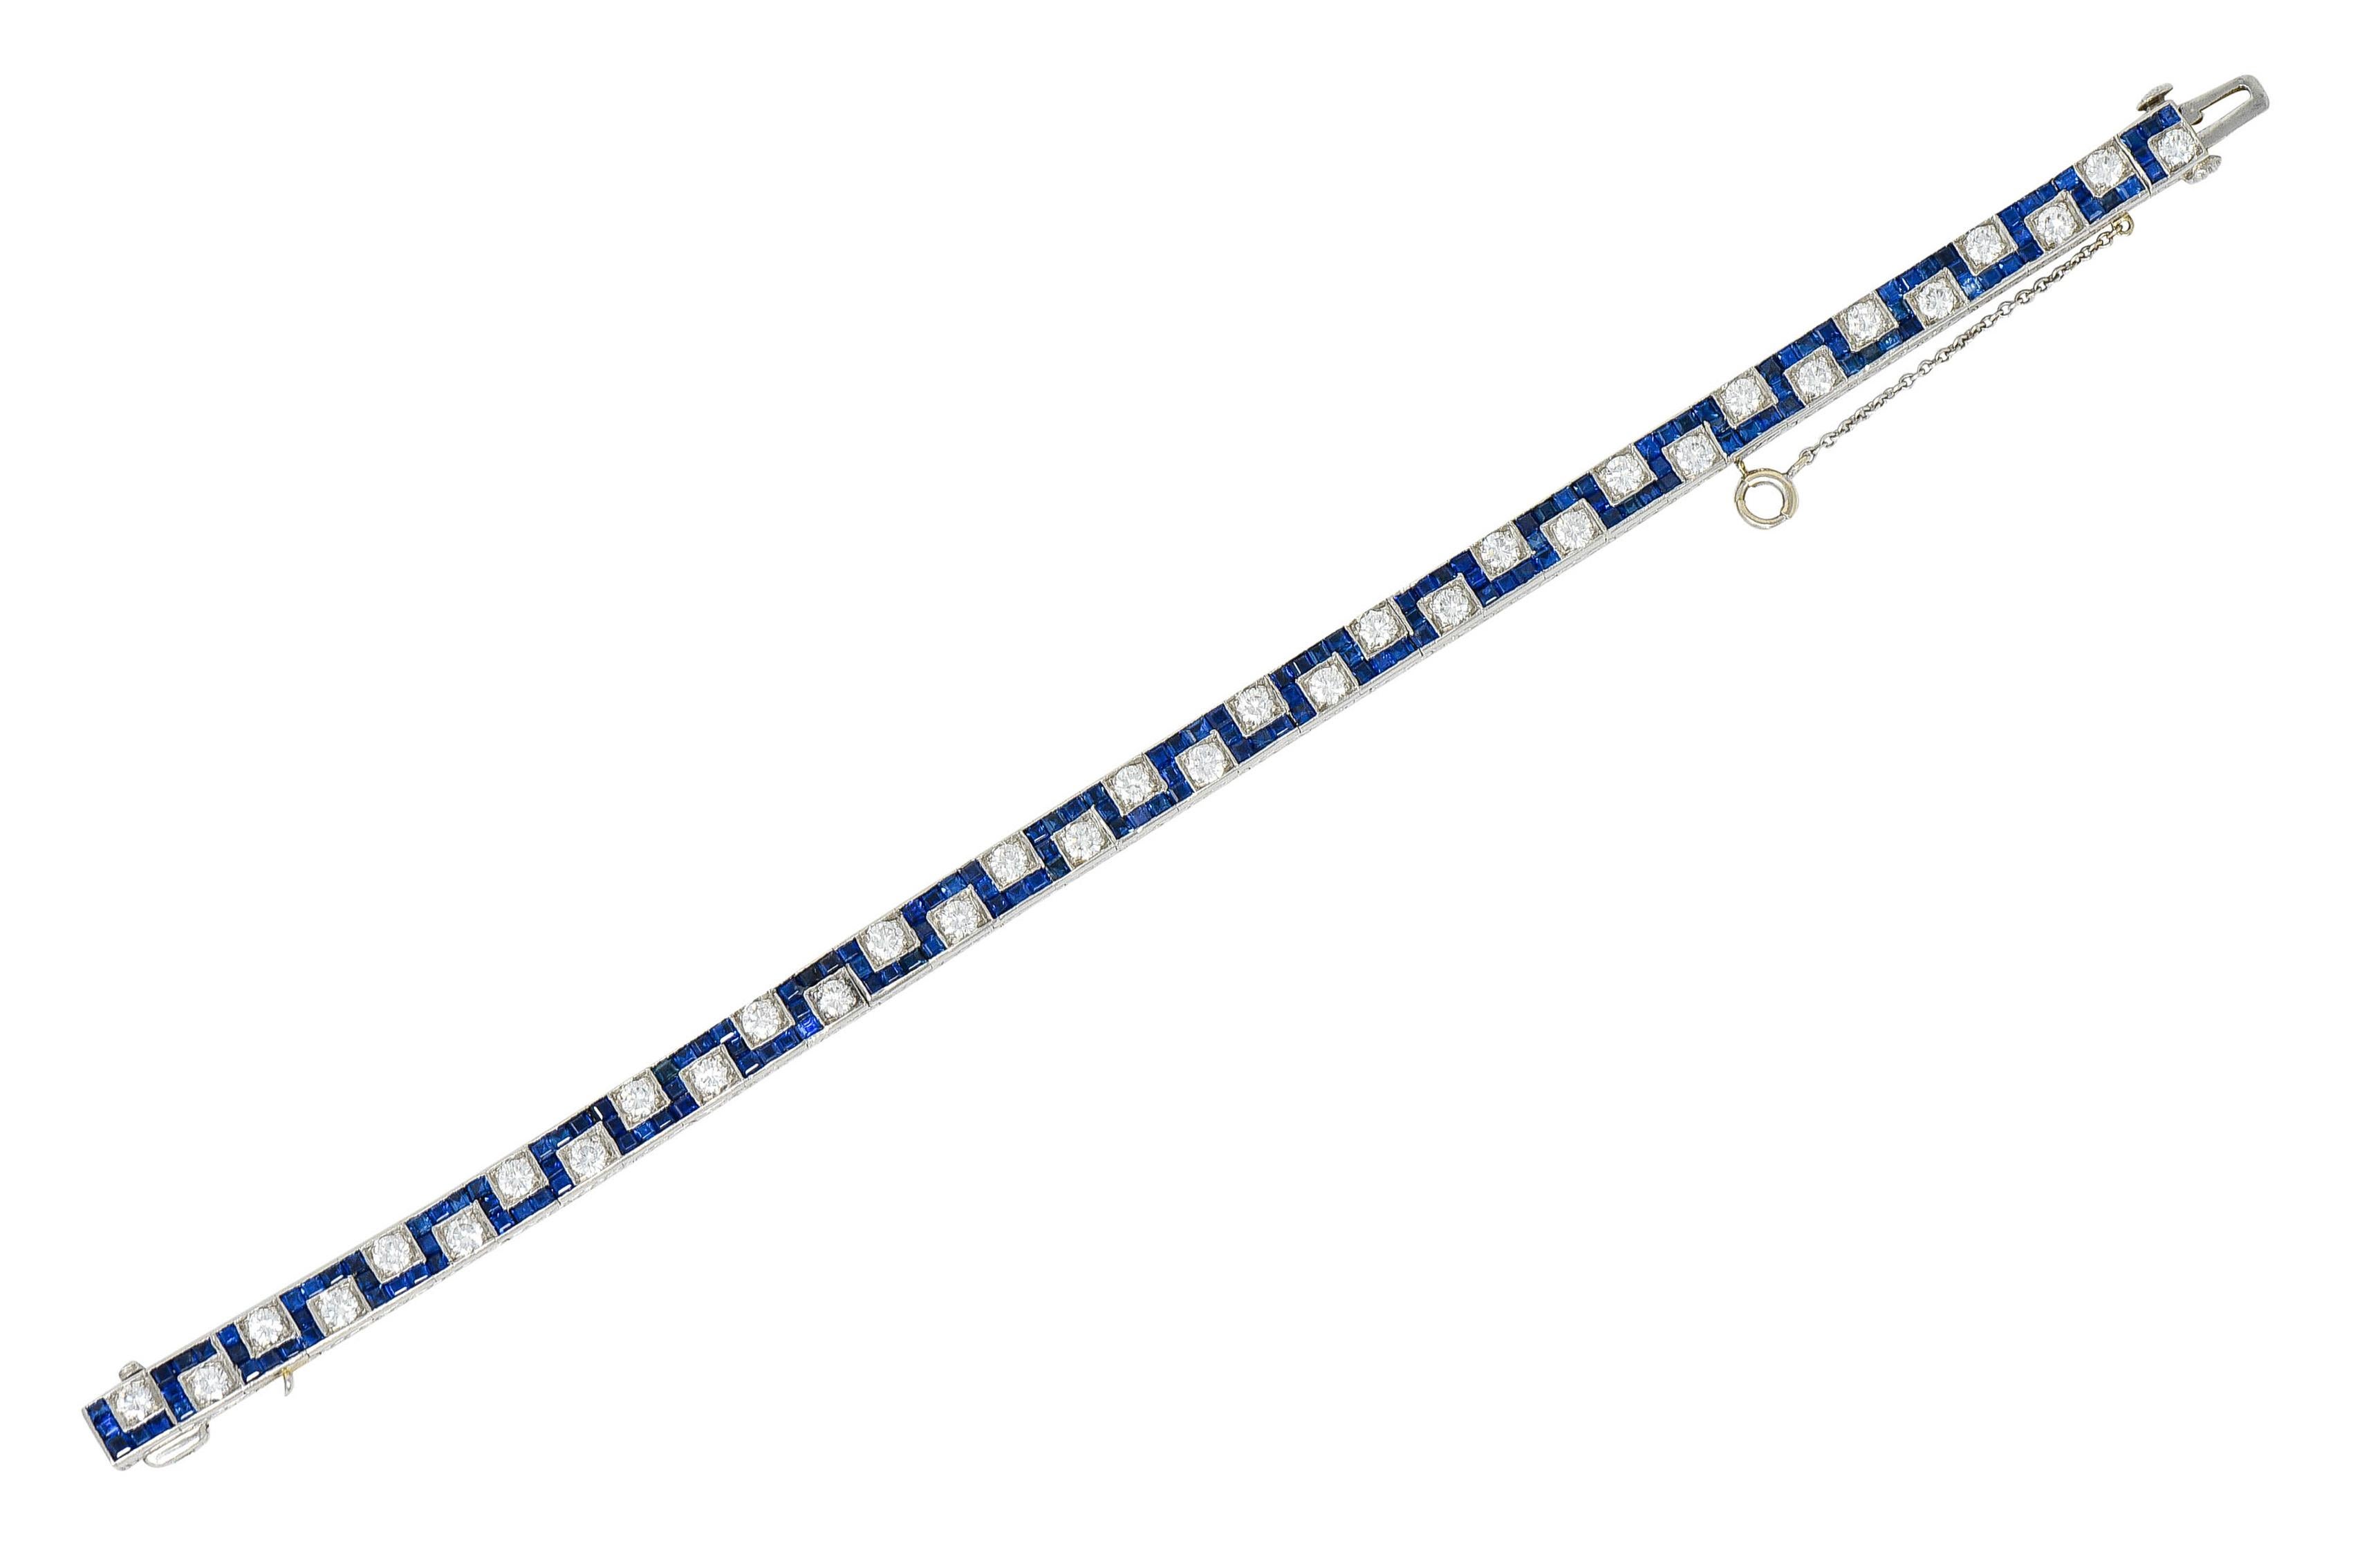 Line bracelet is comprised of square form links - with a deeply engraved side profile

Featuring round brilliant cut diamonds weighing in total approximately 3.45 carats - G/H color with VS clarity

With calibrè cut sapphires set in a zig zagged